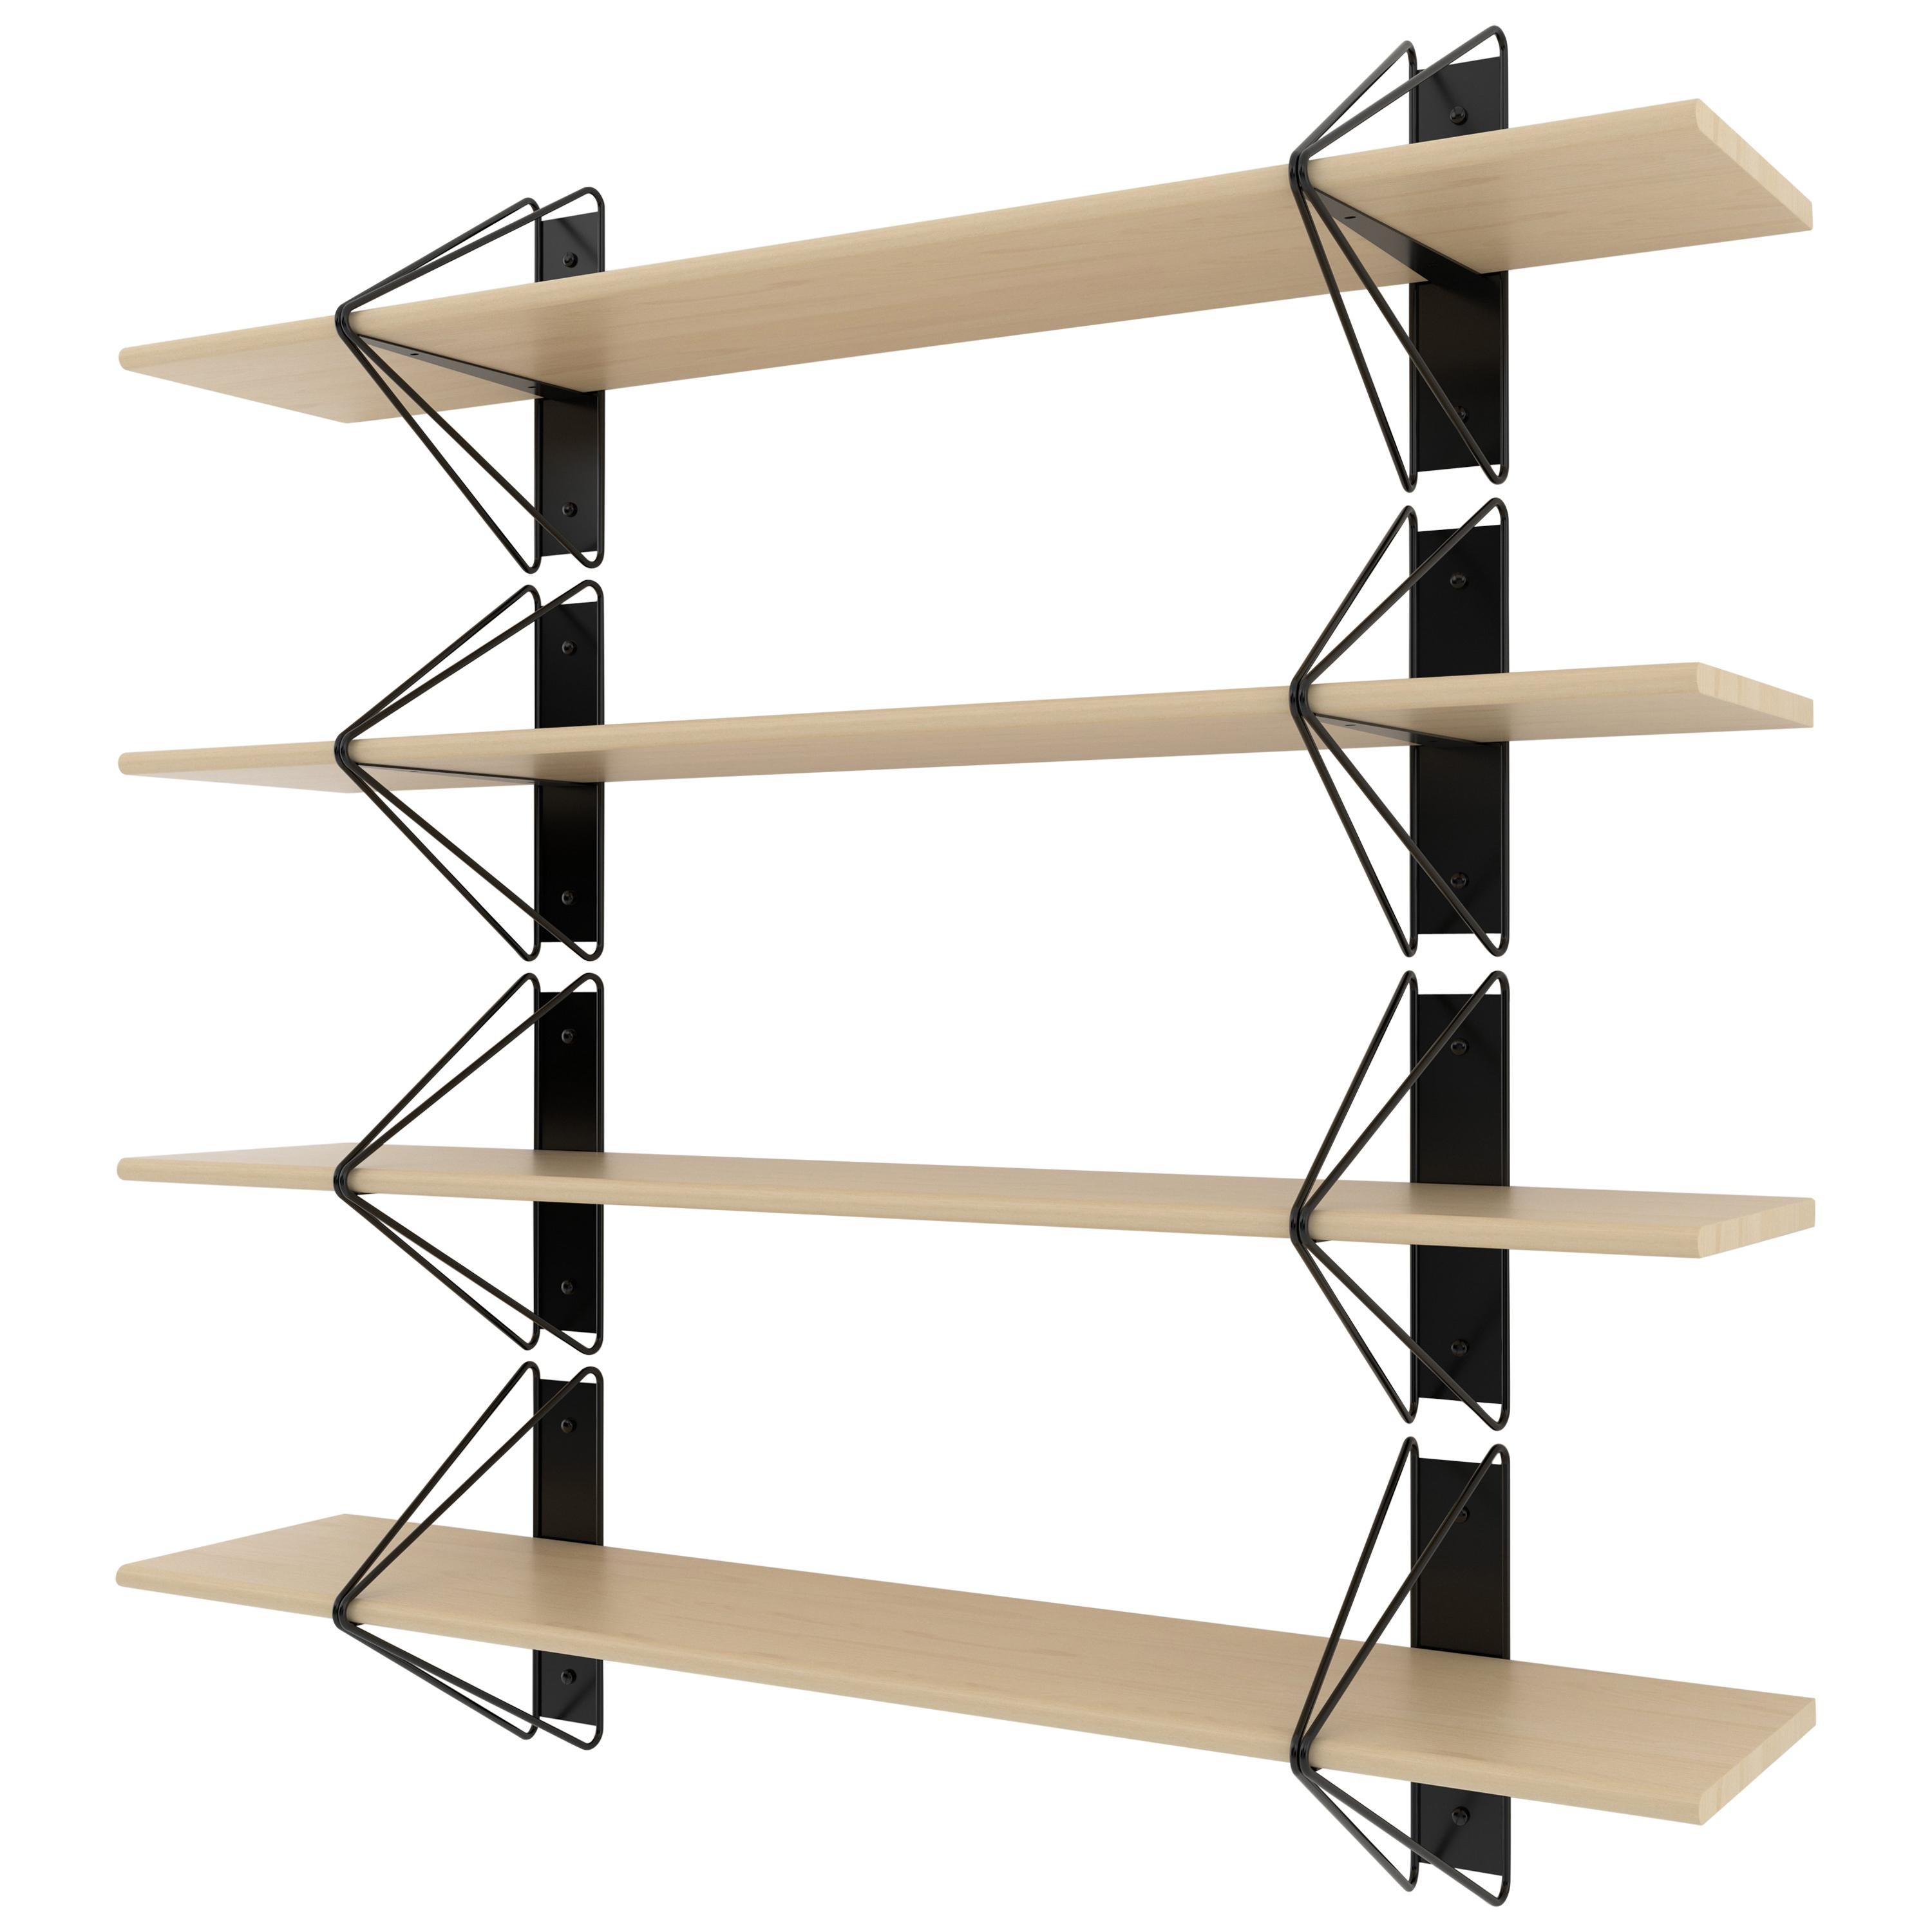 American Set of 4 Strut Shelves from Souda, 52in, Black and Walnut, Made to Order For Sale